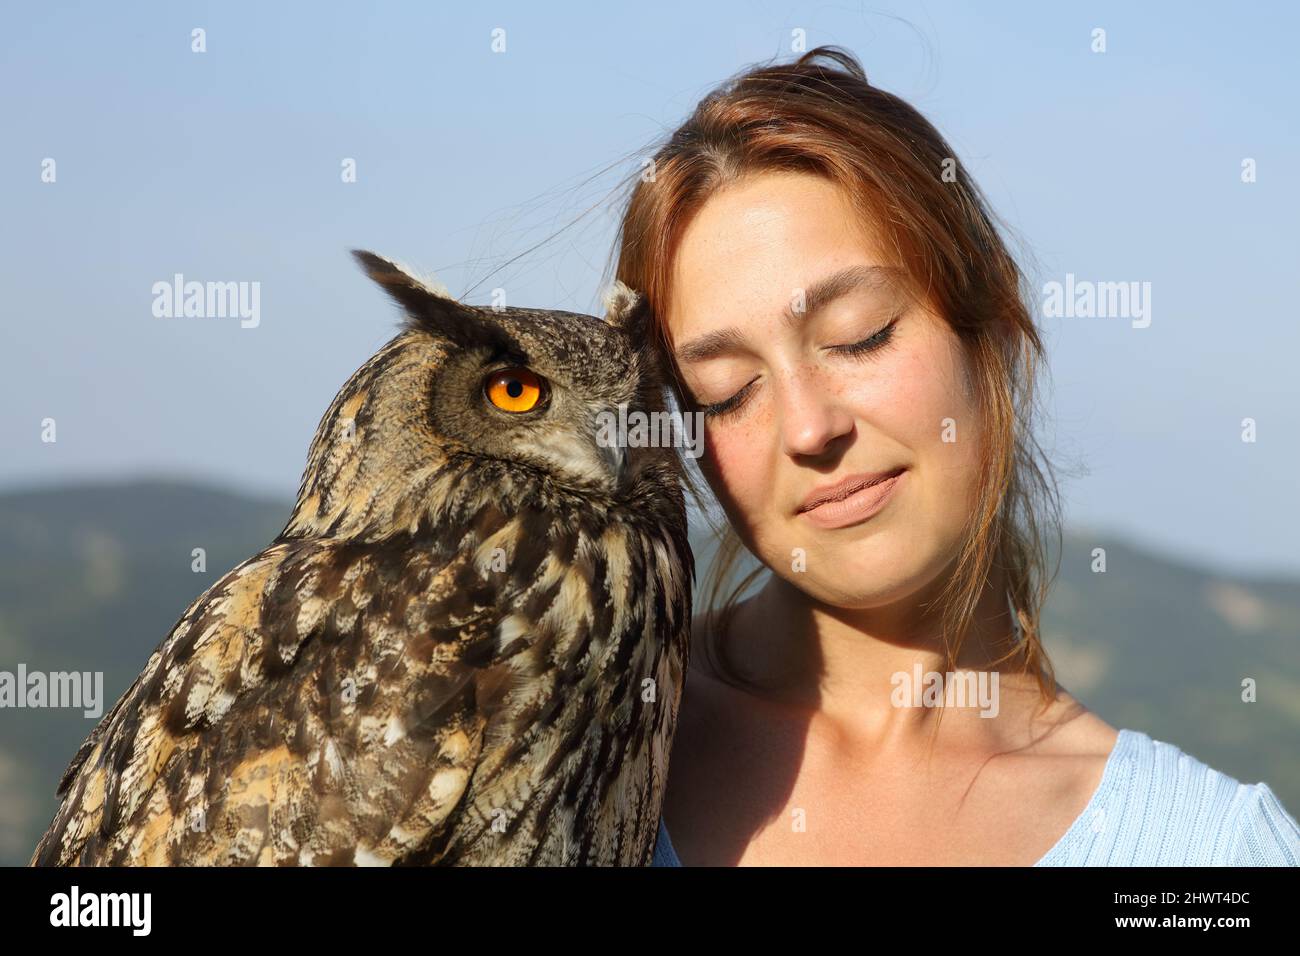 Portrait of an affectionate falconer holding an eagle owl outdoors Stock Photo